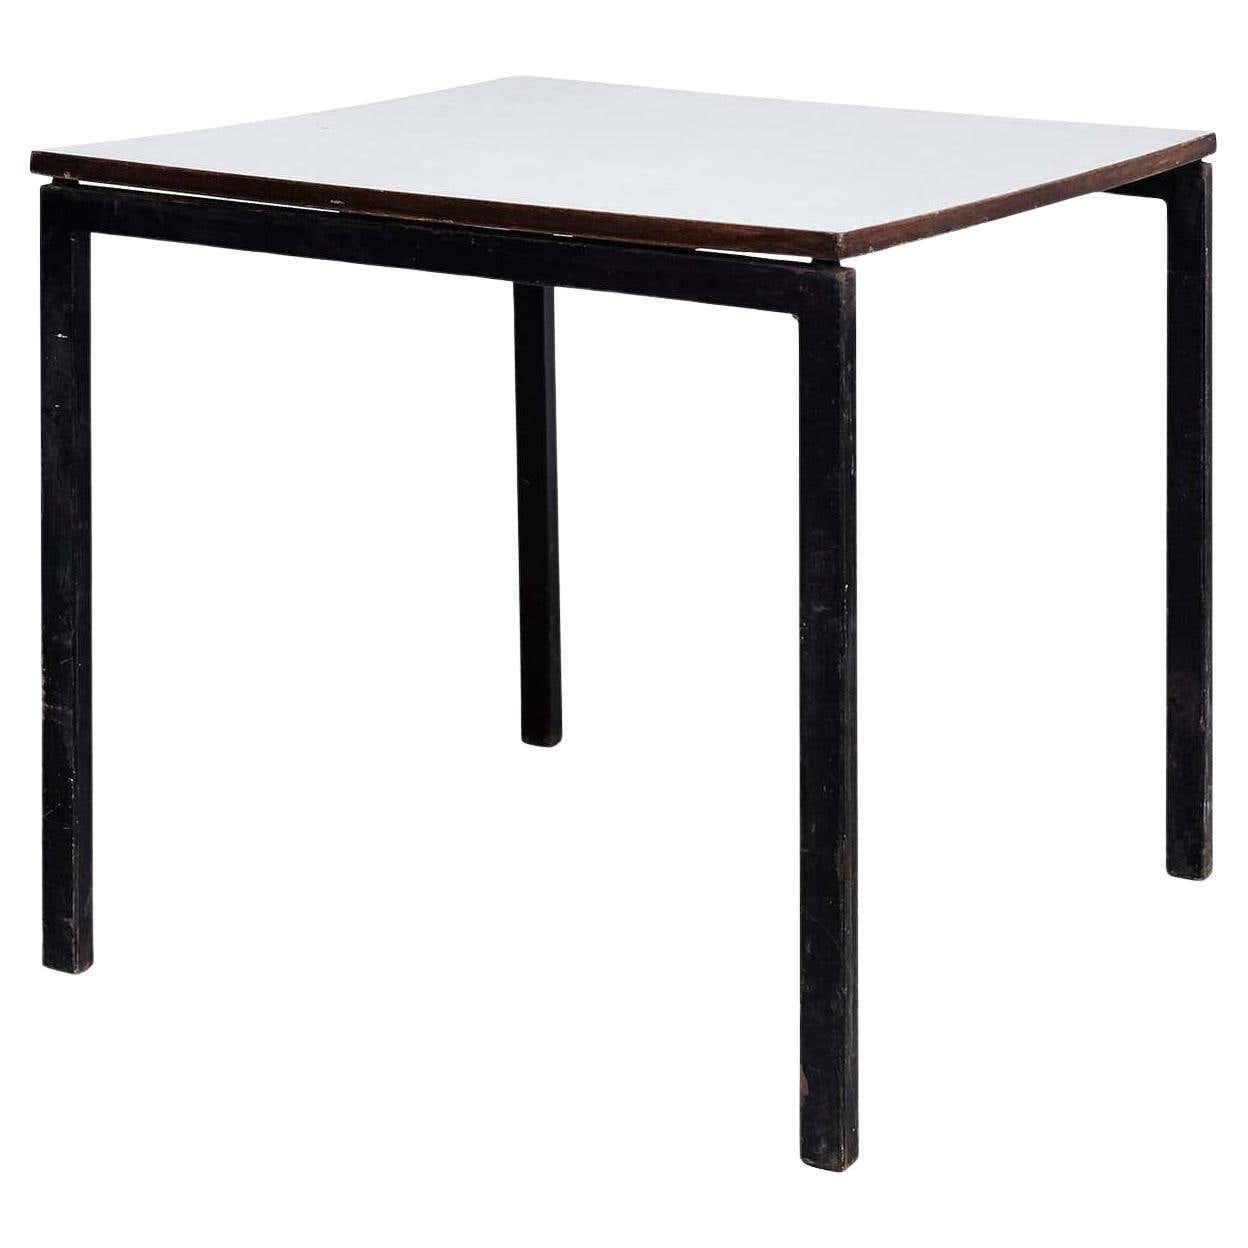 Charlotte Perriand, Mid-Century Modern, Wood Formica and Metal Table, circa 1950 For Sale 15